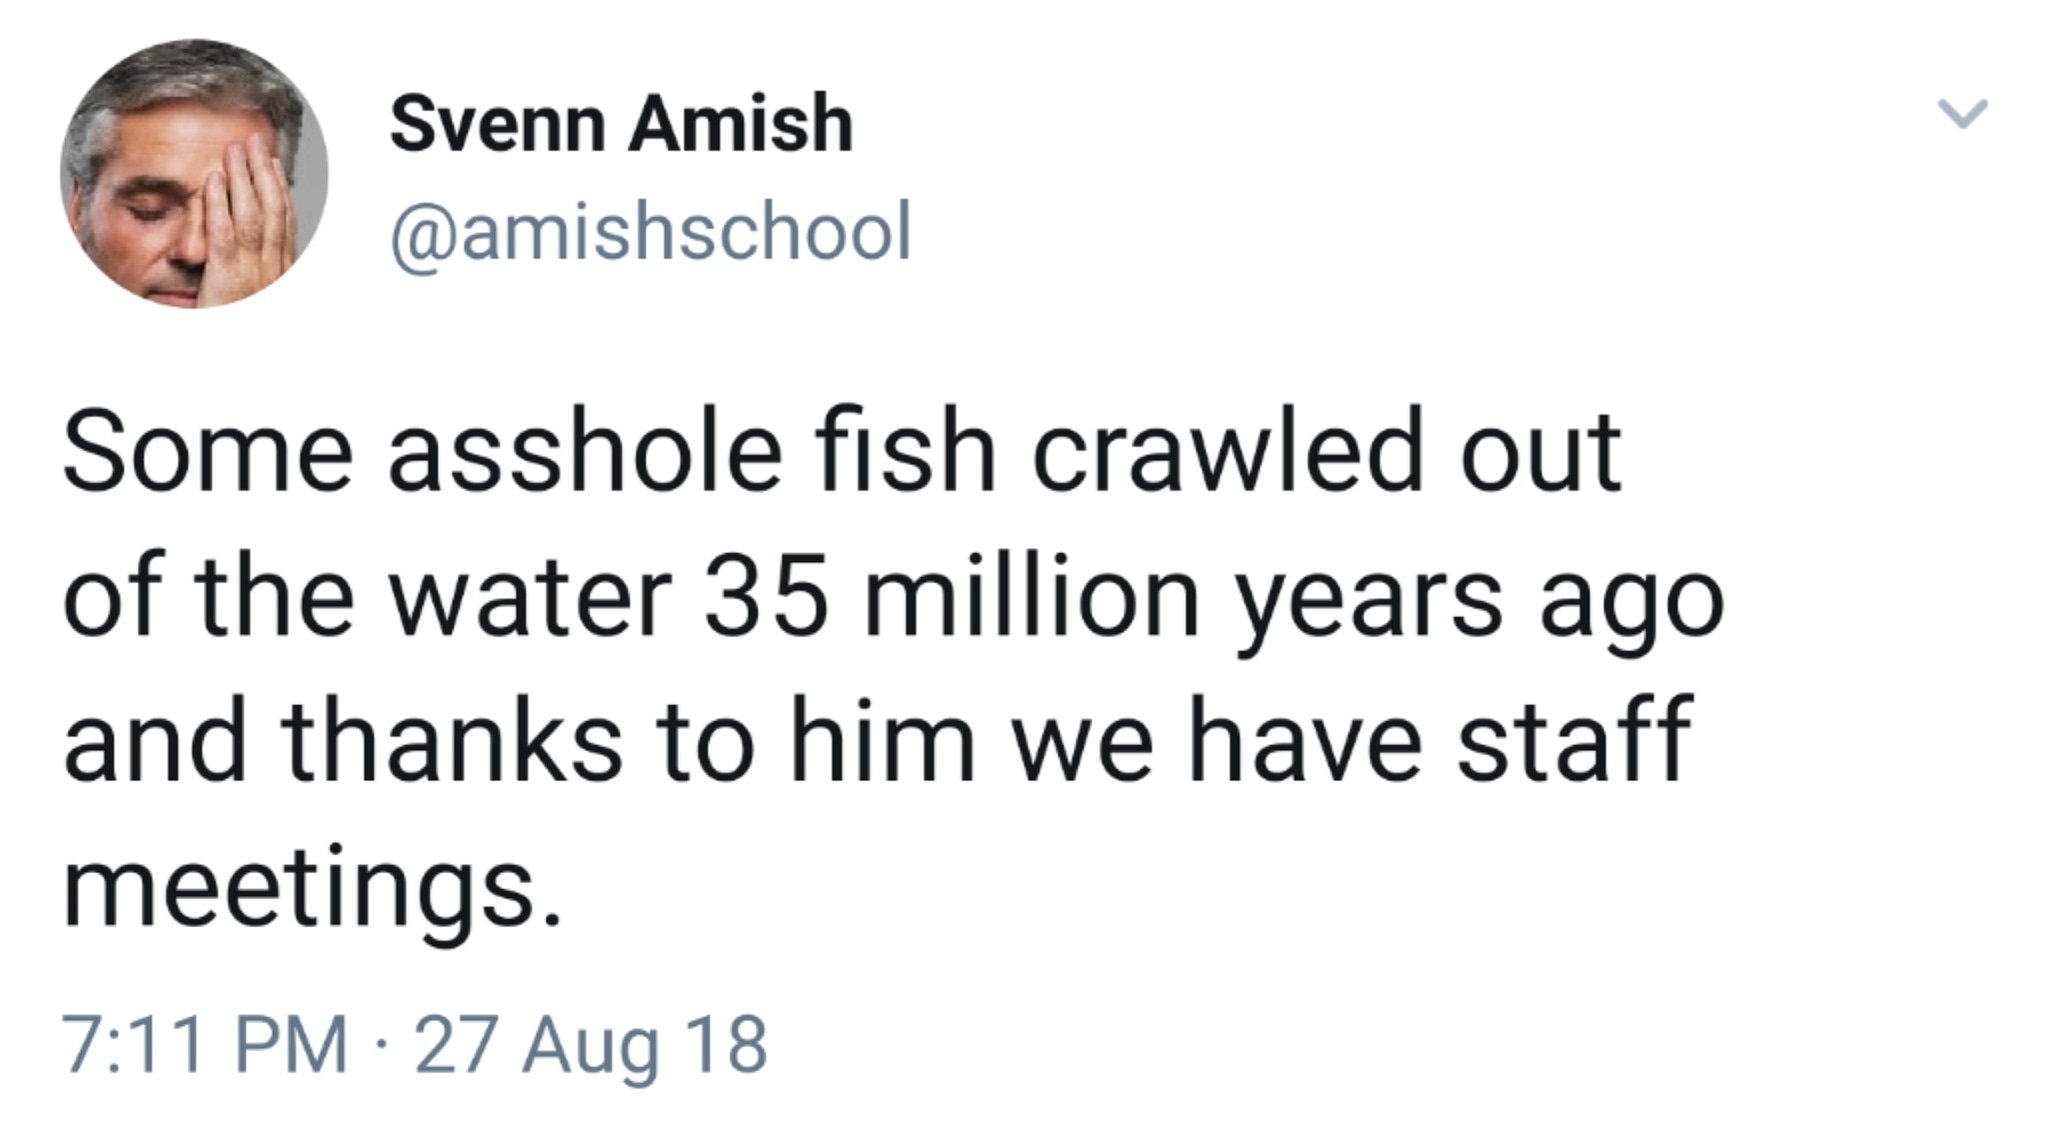 random pics - asshole fish staff meetings - Svenn Amish Some asshole fish crawled out of the water 35 million years ago and thanks to him we have staff meetings. 27 Aug 18